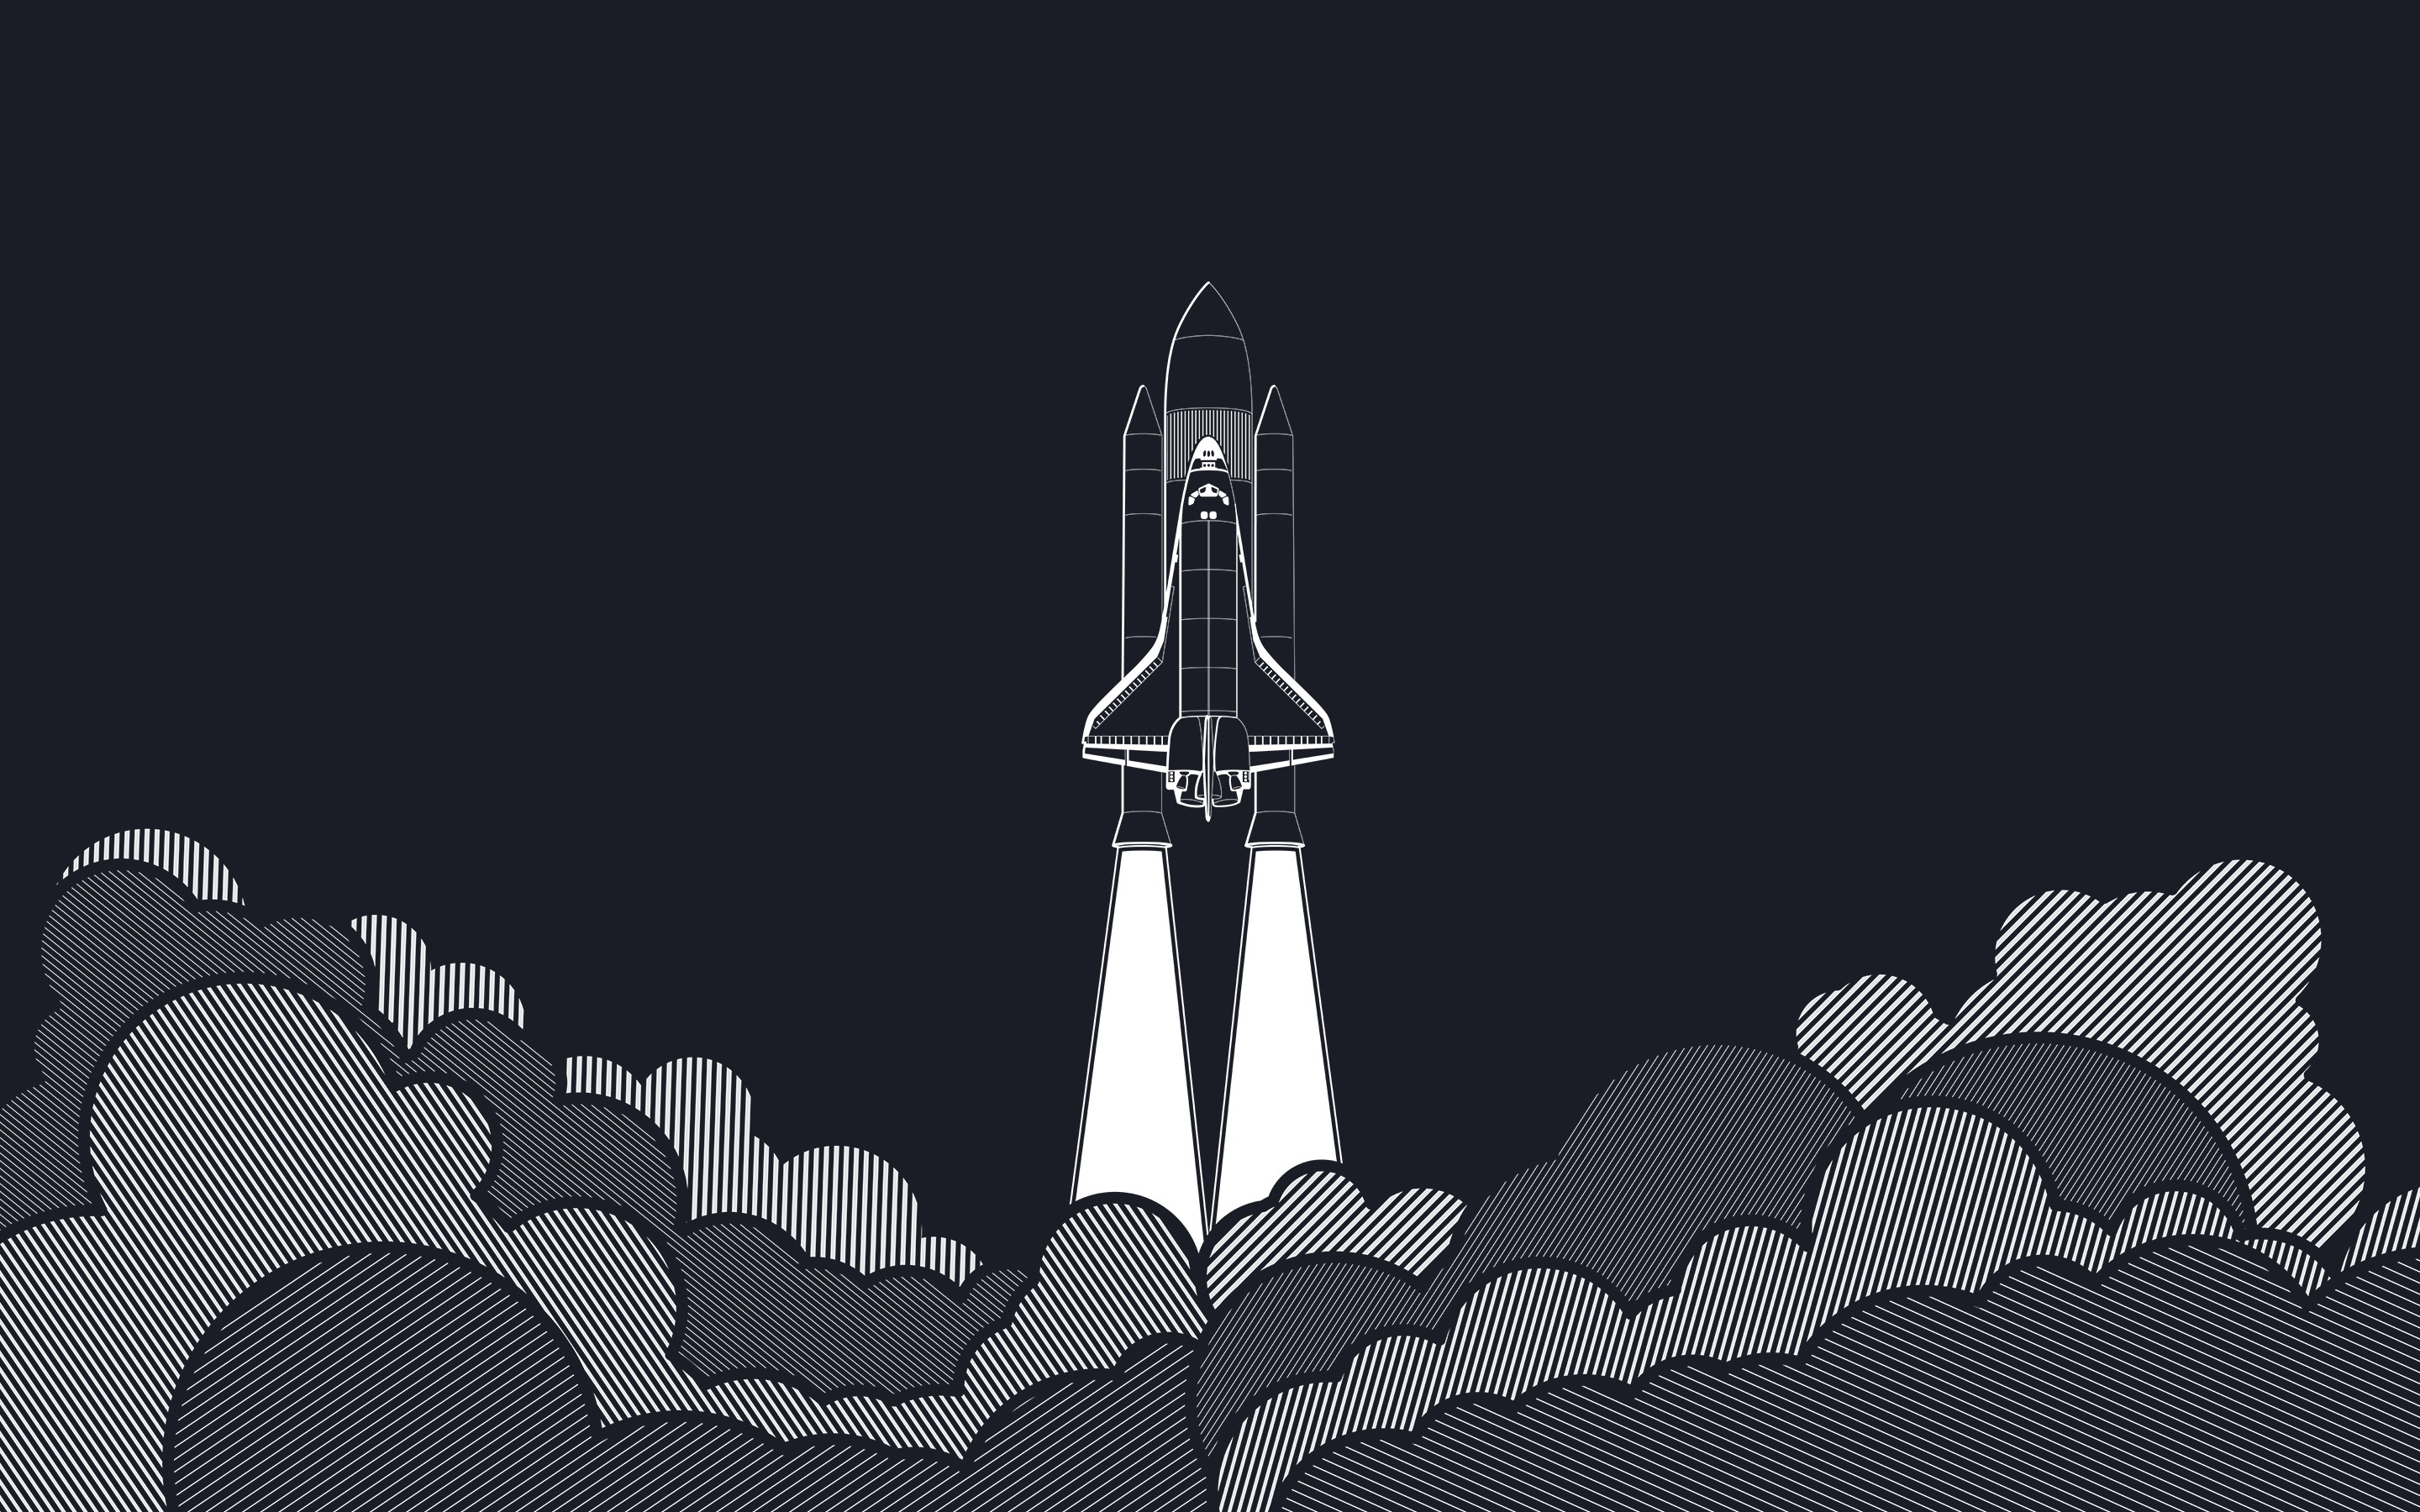 General 2880x1800 artwork space vector space shuttle launch pads spaceship rocket digital art flying smoke gray background white aircraft blue science vehicle simple background